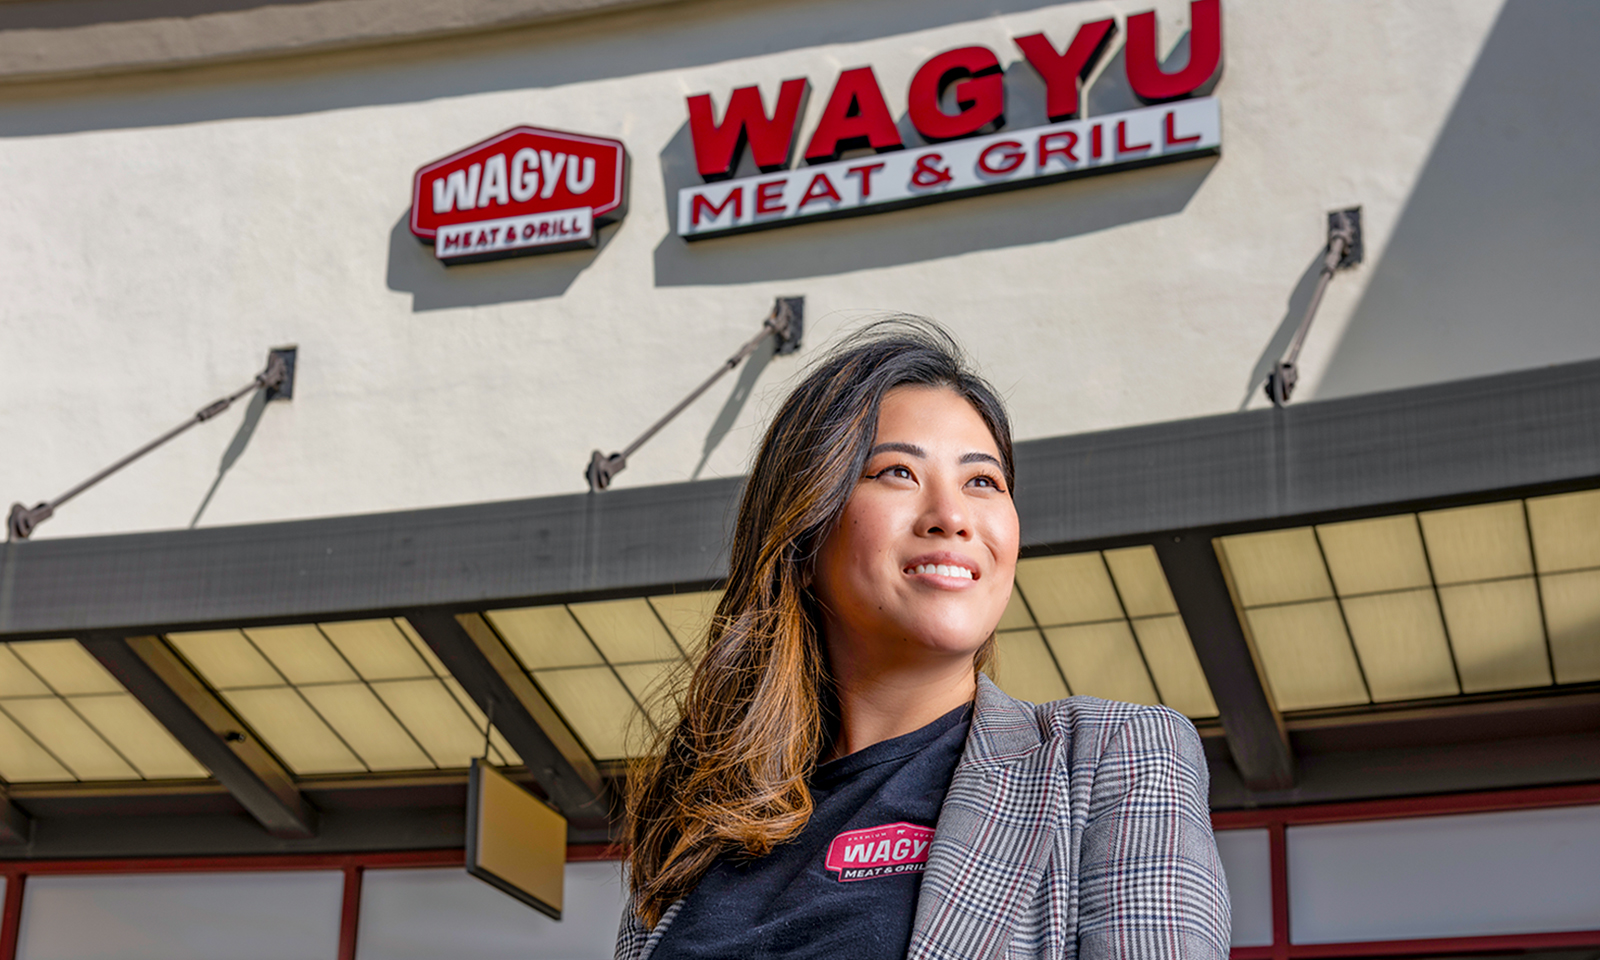 Wagyu Meat & Grill opens second Irvine location